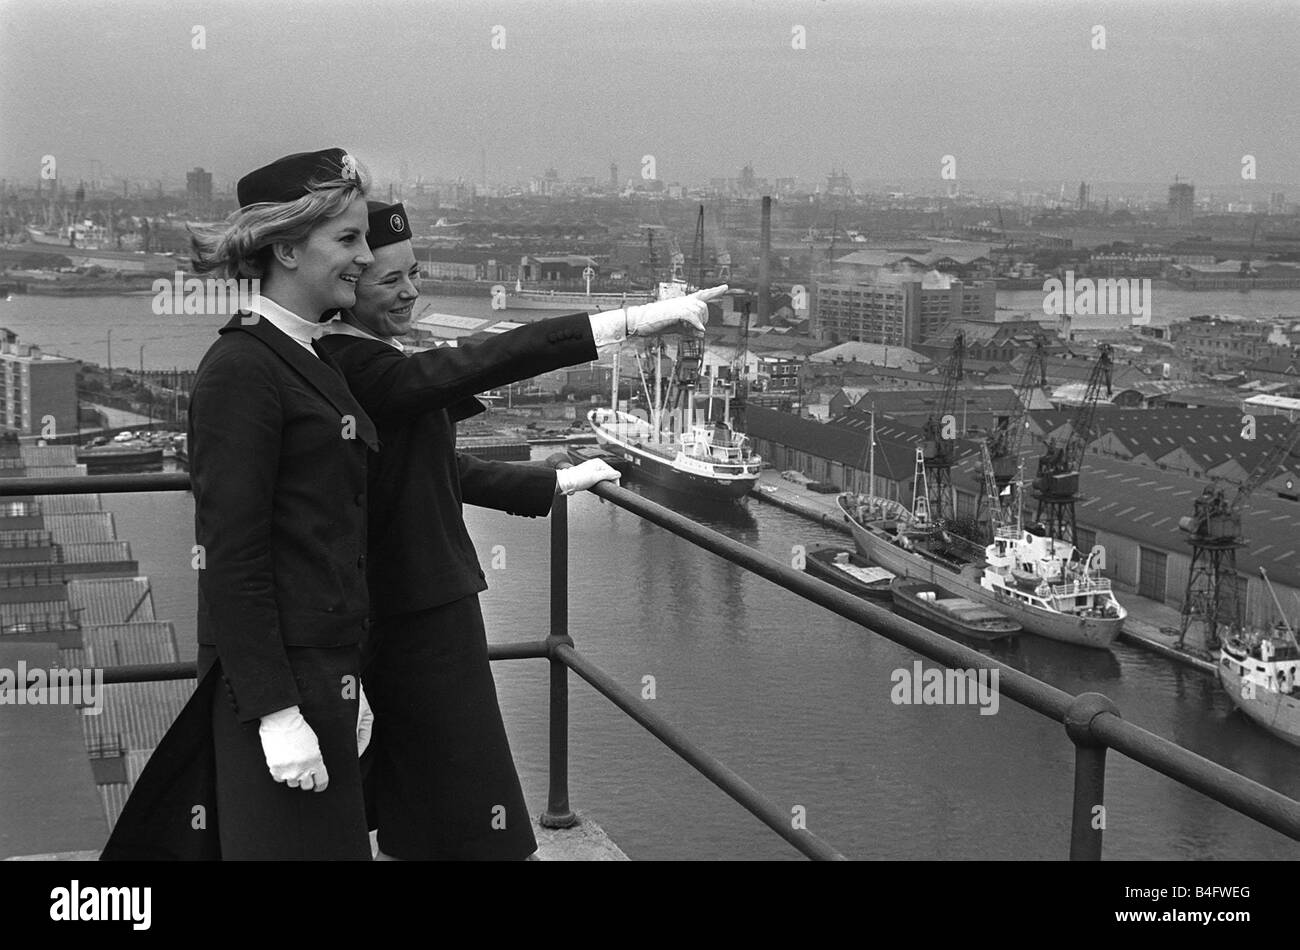 Port of London Dock Guides June 1965 Two of the guides talk as they look over the ships in the docks on the River Thames in London One of the ladies points across the docks Stock Photo